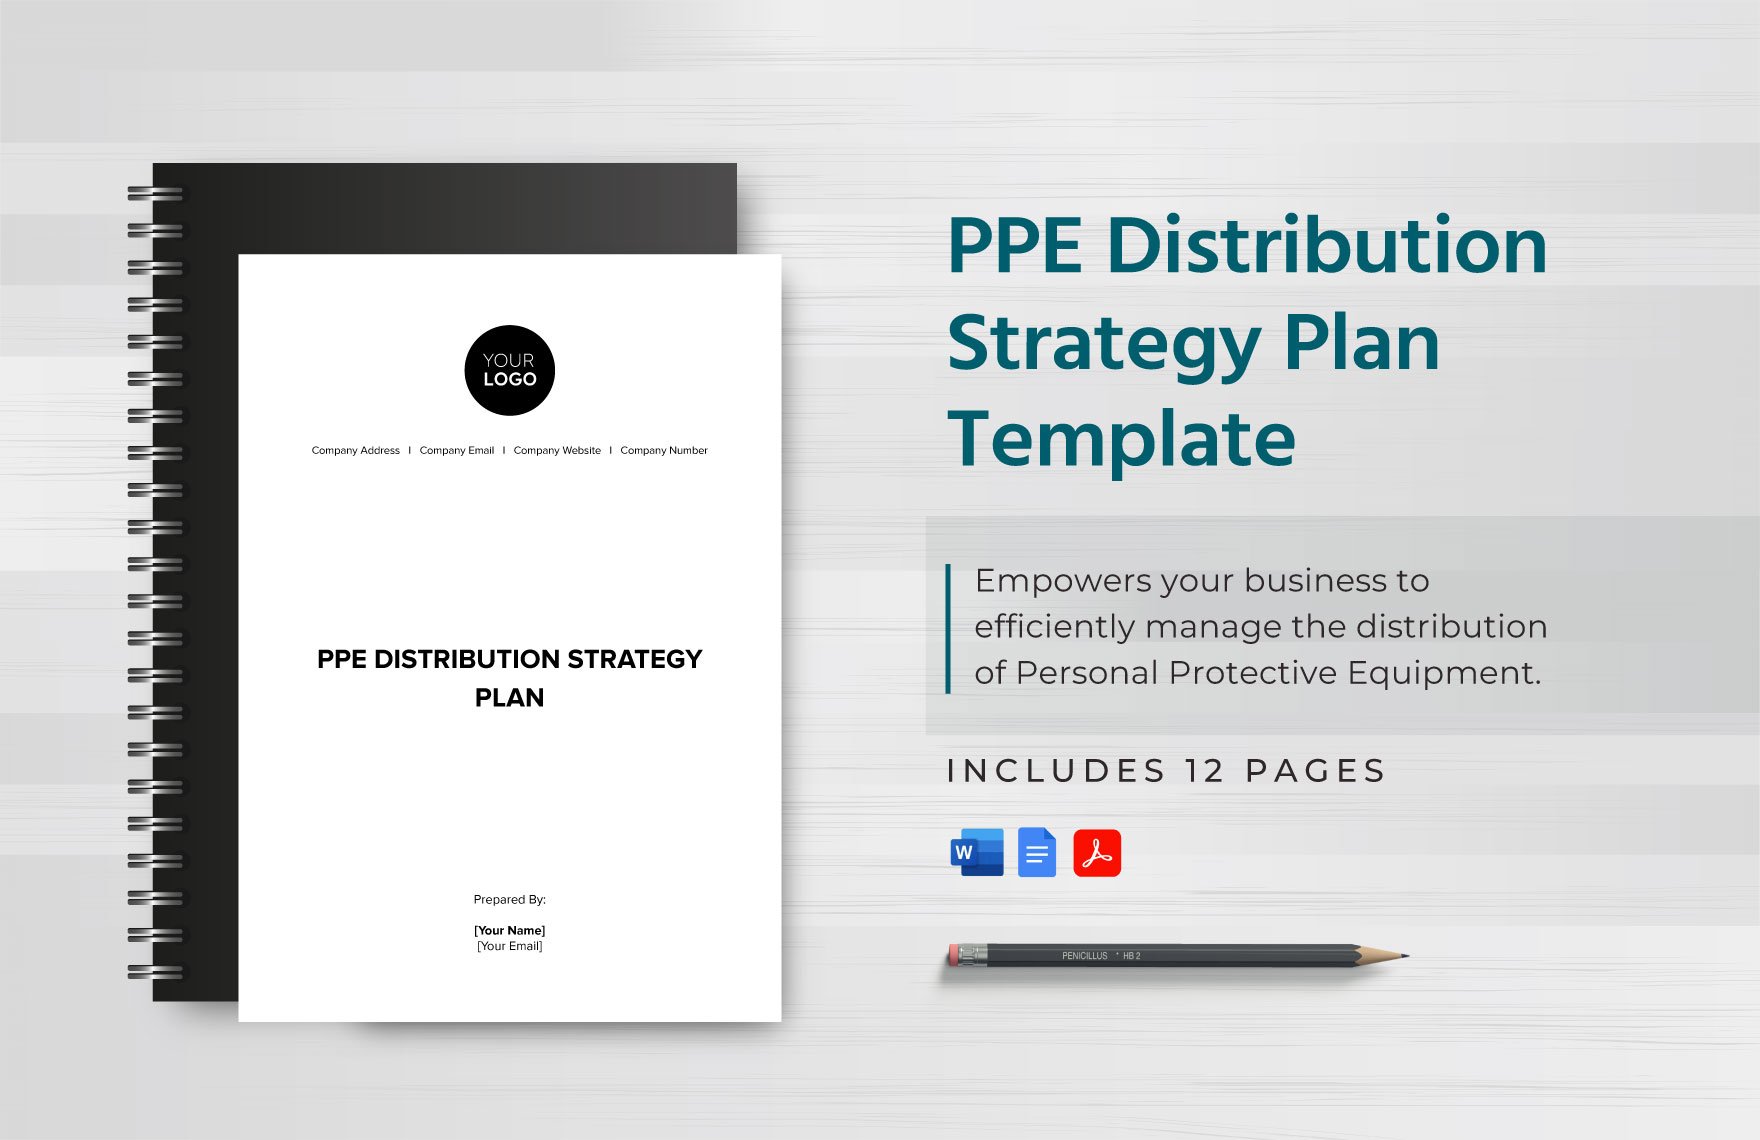 PPE Distribution Strategy Plan Template